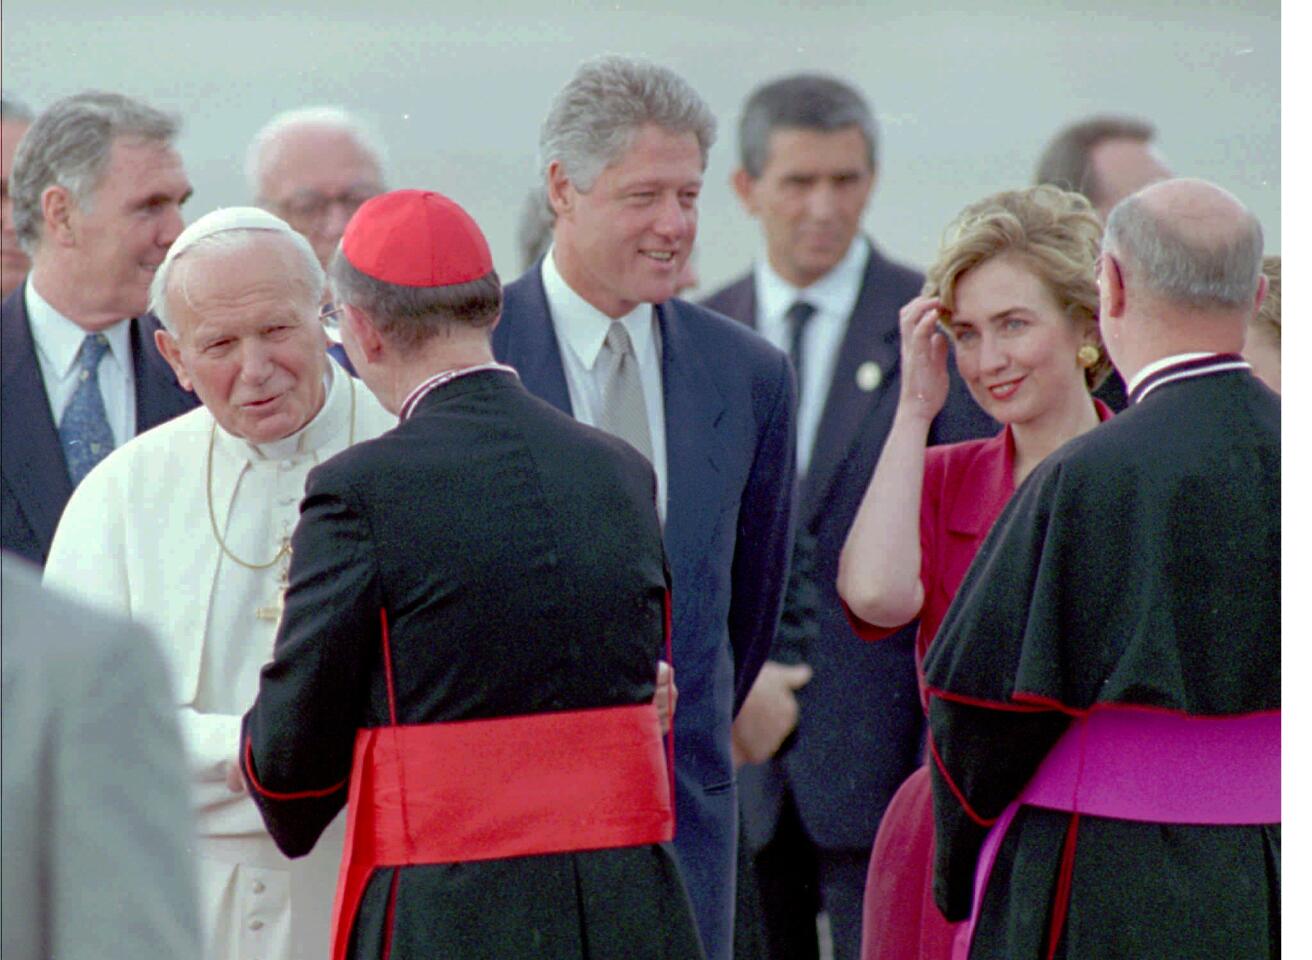 Pope John Paul II, President Clinton and First Lady Hillary Rodham Clinton greet cardinals and bishops in Denver after the pope's arrival.